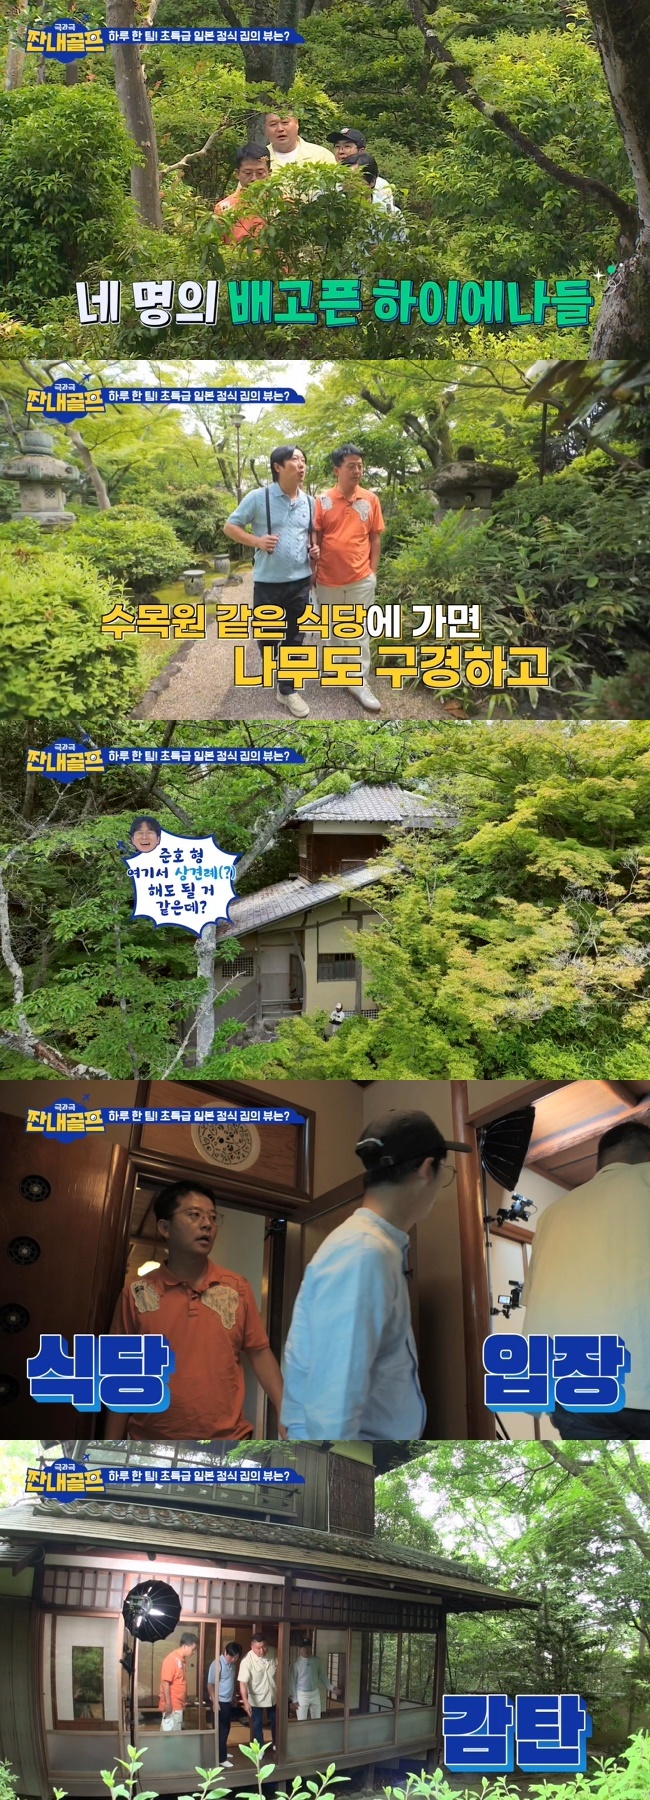 Hong In-kyu recommended a Japanese restaurant, such as an arboretum, as a meeting place for Kim Jun-ho and Kim Ji-min.On TVN STORY  ⁇ More Salty Tour Golf Tour broadcasted on August 11, MC team Kang Ho-dong, Lee Soo-geun, Kim Jun-ho and Hong In-kyu visited Kaiseki restaurant.On the third day of the trip to Japan, four people woke up at 4 am and came out to the golf course. Kim Jun-ho boasted that it was an ocean view art, and Kang Ho-dong pointed out that it would not have been seen well last night.Kim Jun-ho said, Yesterday I was going to see the morning view, but I did not see it at 4 oclock. Lee Soo-geun pointed out the long address, saying, It takes two hours because of you.The first round was given a set of luxury desserts at the time of victory, the second round Winners & Losers enjoyed 11 full-course meals at the Kaiseki restaurant private outing, and the loser had to deliver 11 round trips 150m from the kitchen to the Winners & Losers team room.At the end of the showdown, Kang Ho-dong won the match and the four moved to the restaurant together. Lee Soo-geun said, There is a restaurant here?Hong In-kyu said, I think I will come out of the waterfall I went to yesterday. Hong In-kyu also said, I will be healthy if I live like this.When the outbuildings for the four people were revealed, Hong In-kyu mentioned the meeting with Kim Ji-mins family, saying, I think you can meet here. Kim Jun-ho laughed lightly.Hong In-kyu was surprised that it was like a movie, and Kang Ho-dong was satisfied with the quiet atmosphere that he felt like taking a nap while listening to the rain in a big house.